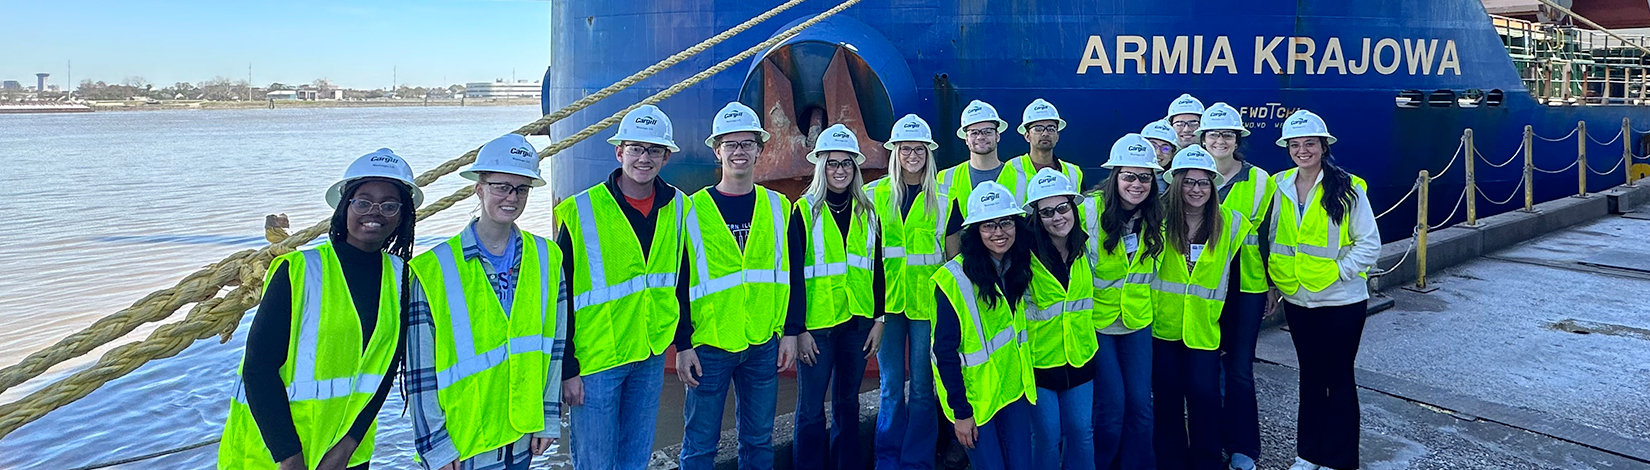 Students wearing neon yellow safety vests, hard hats, and safety glasses pose for a photo in front of a ship.